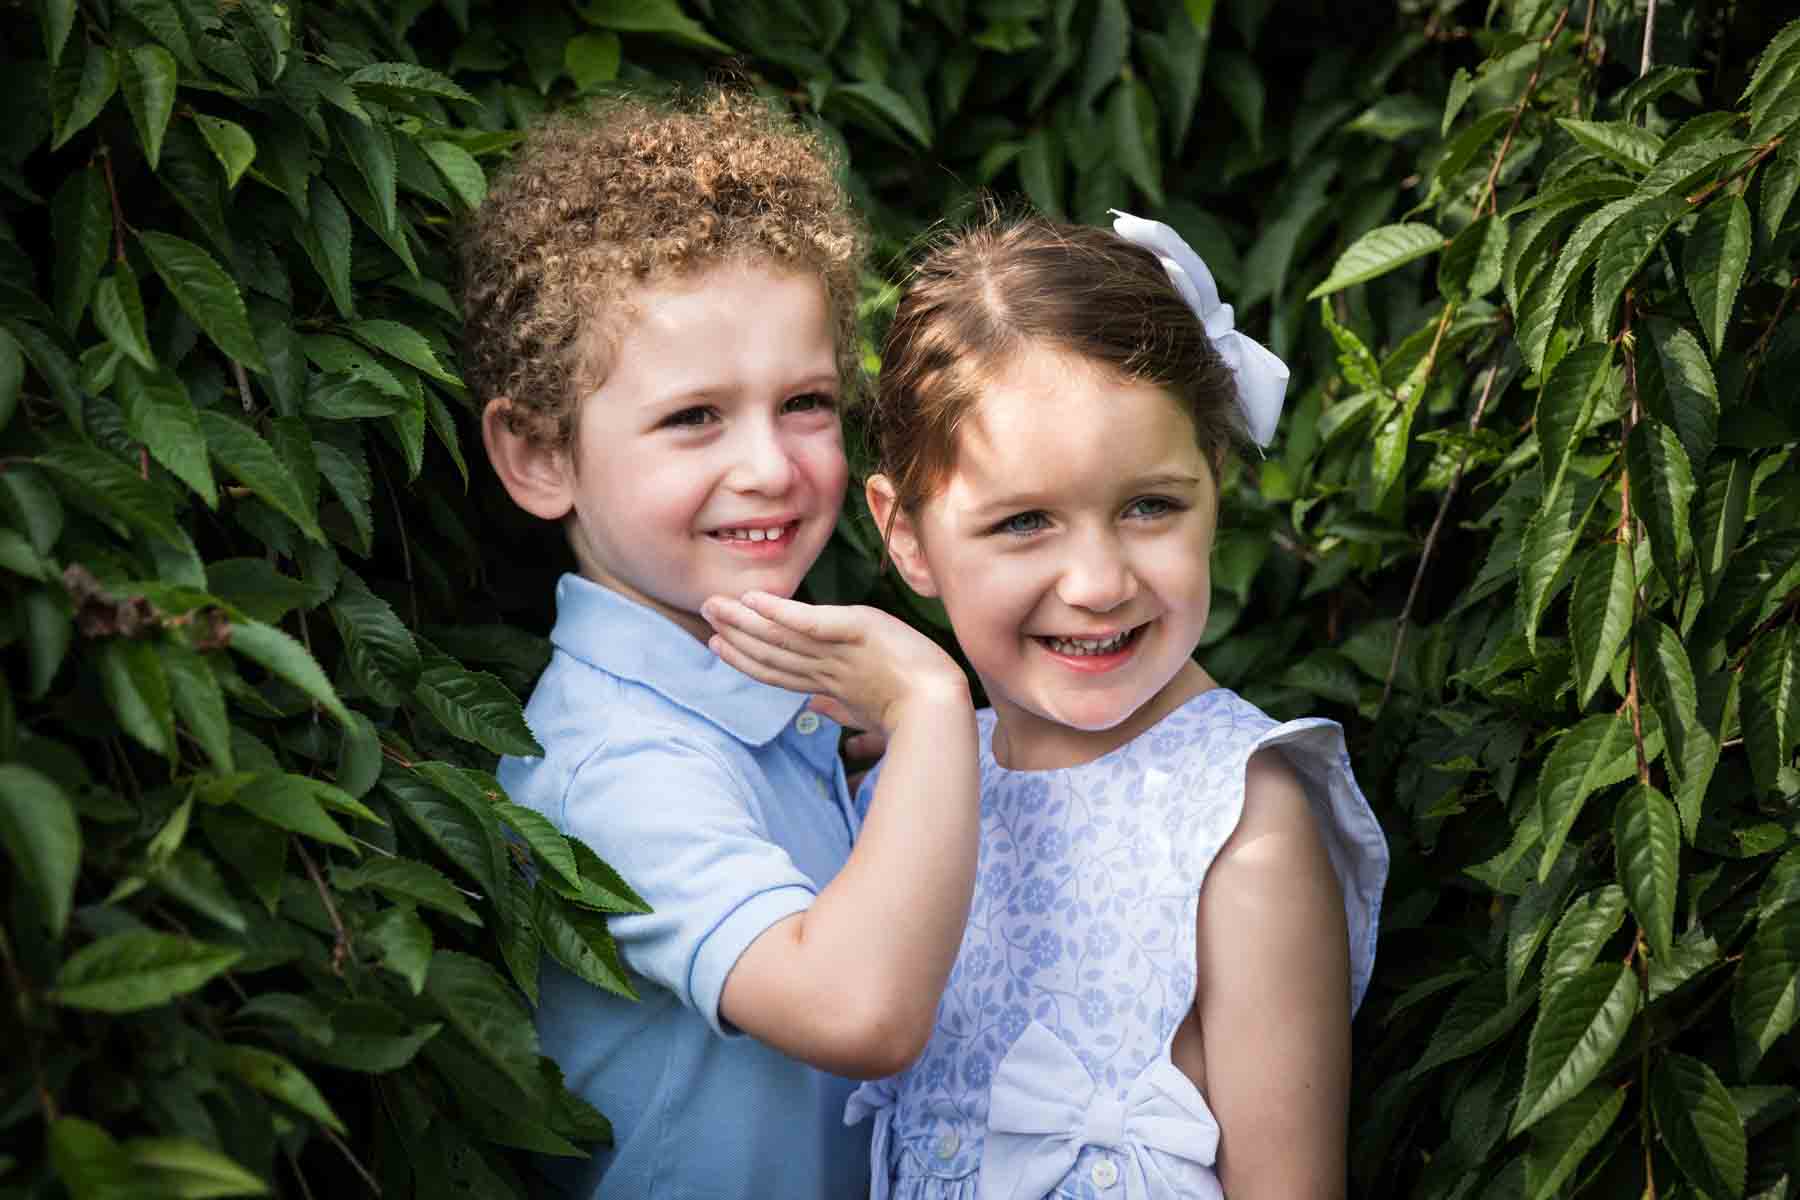 Little boy and girl smiling in front of green bush for an article on the best San Antonio parks for family portraits